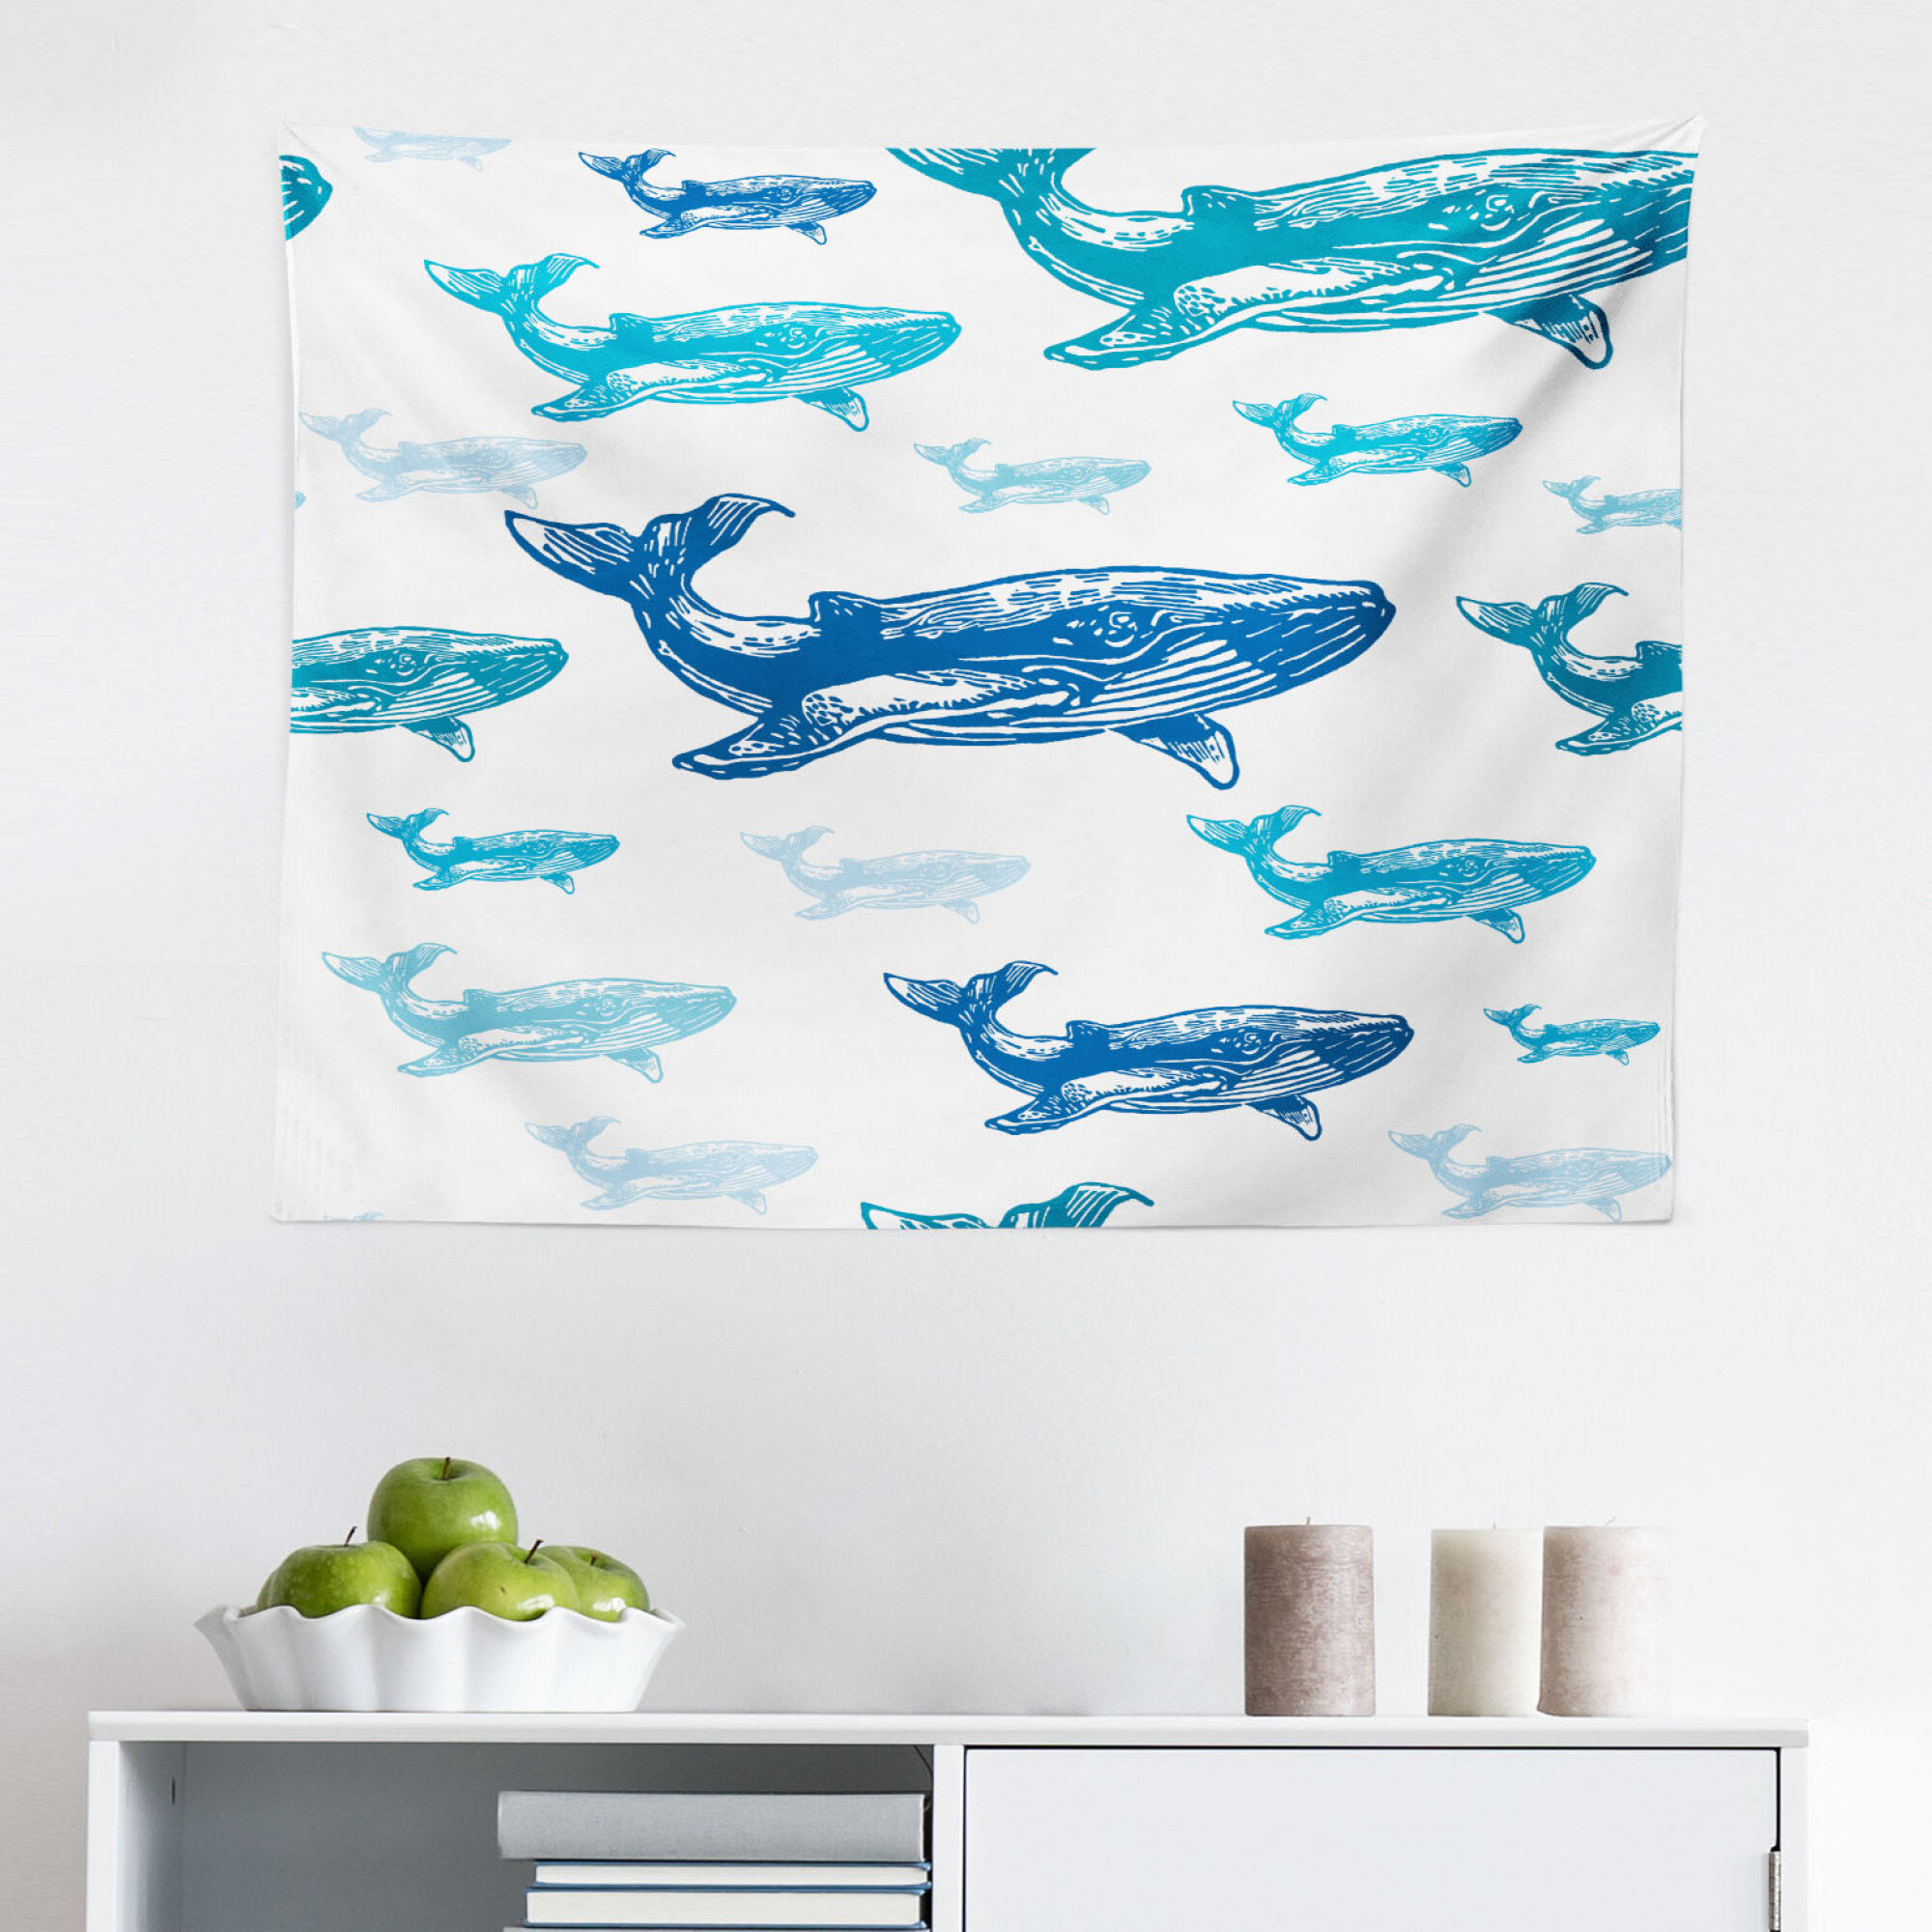 East Urban Home Ambesonne Sea Animals Tapestry, Colorful Realistic Engraved  Style Of Whale Animals Dangerous Creature Print, Fabric Wall Hanging Decor  For Bedroom Living Room Dorm, 45